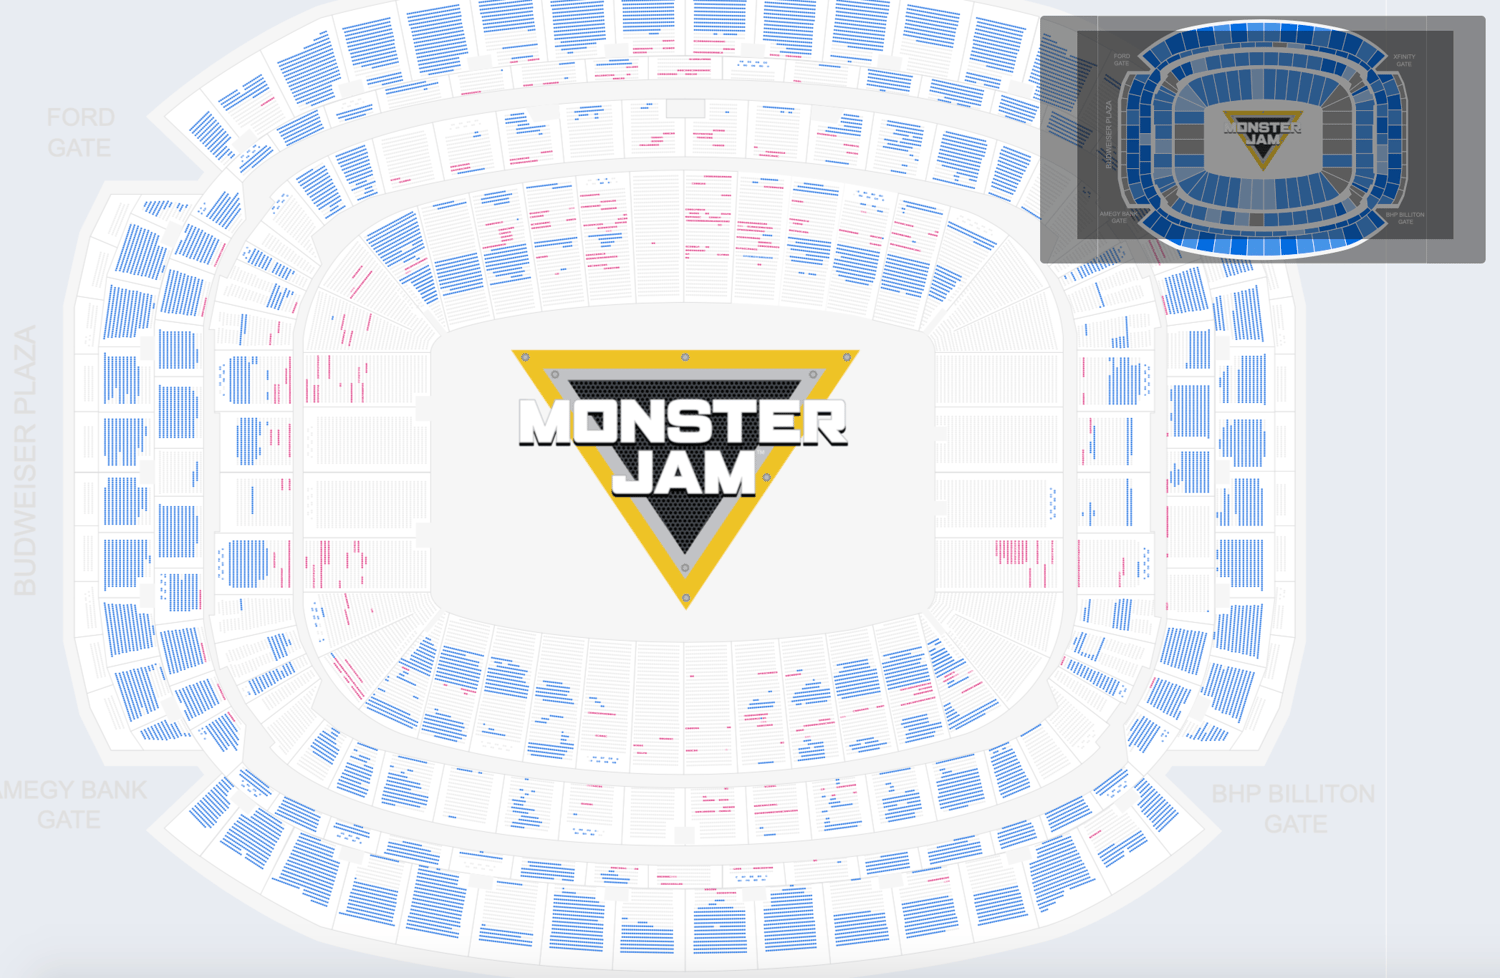 How To Find The Cheapest Monster Jam Tickets + Face Value Options